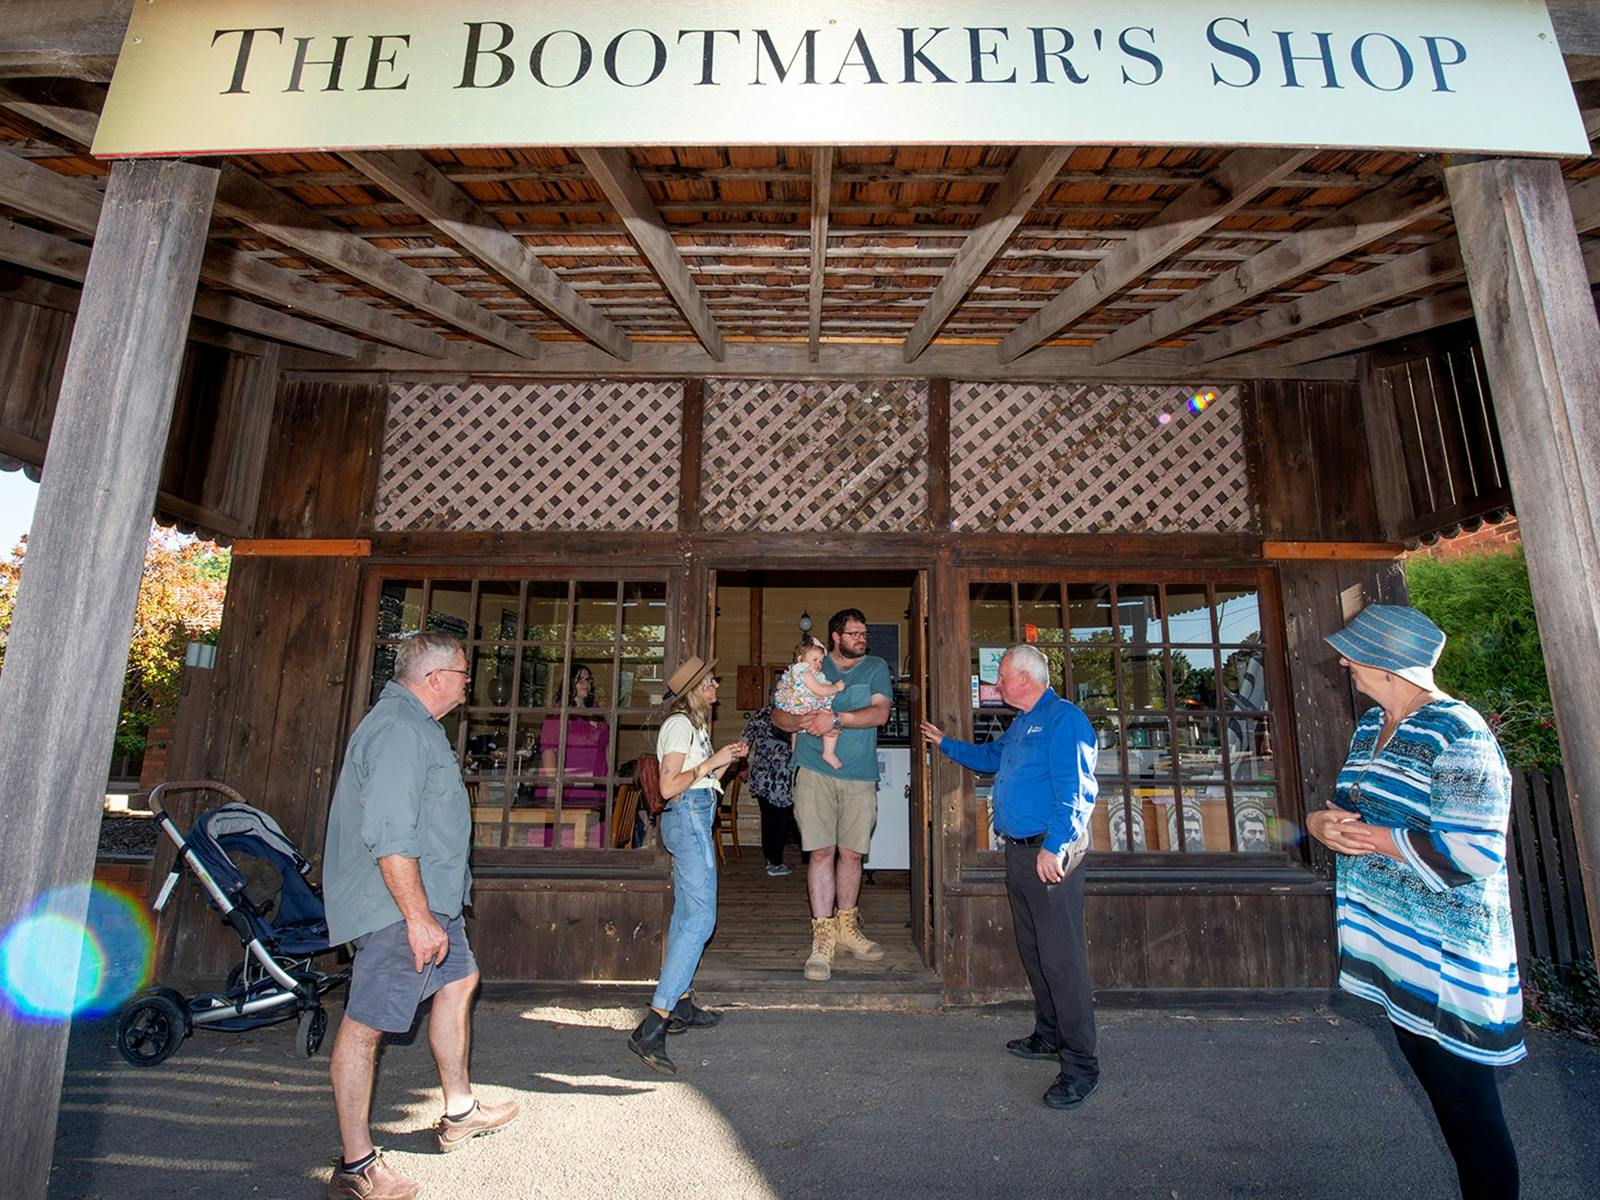 The Bootmakers Shop, we have exclusive access to see inside the shop.